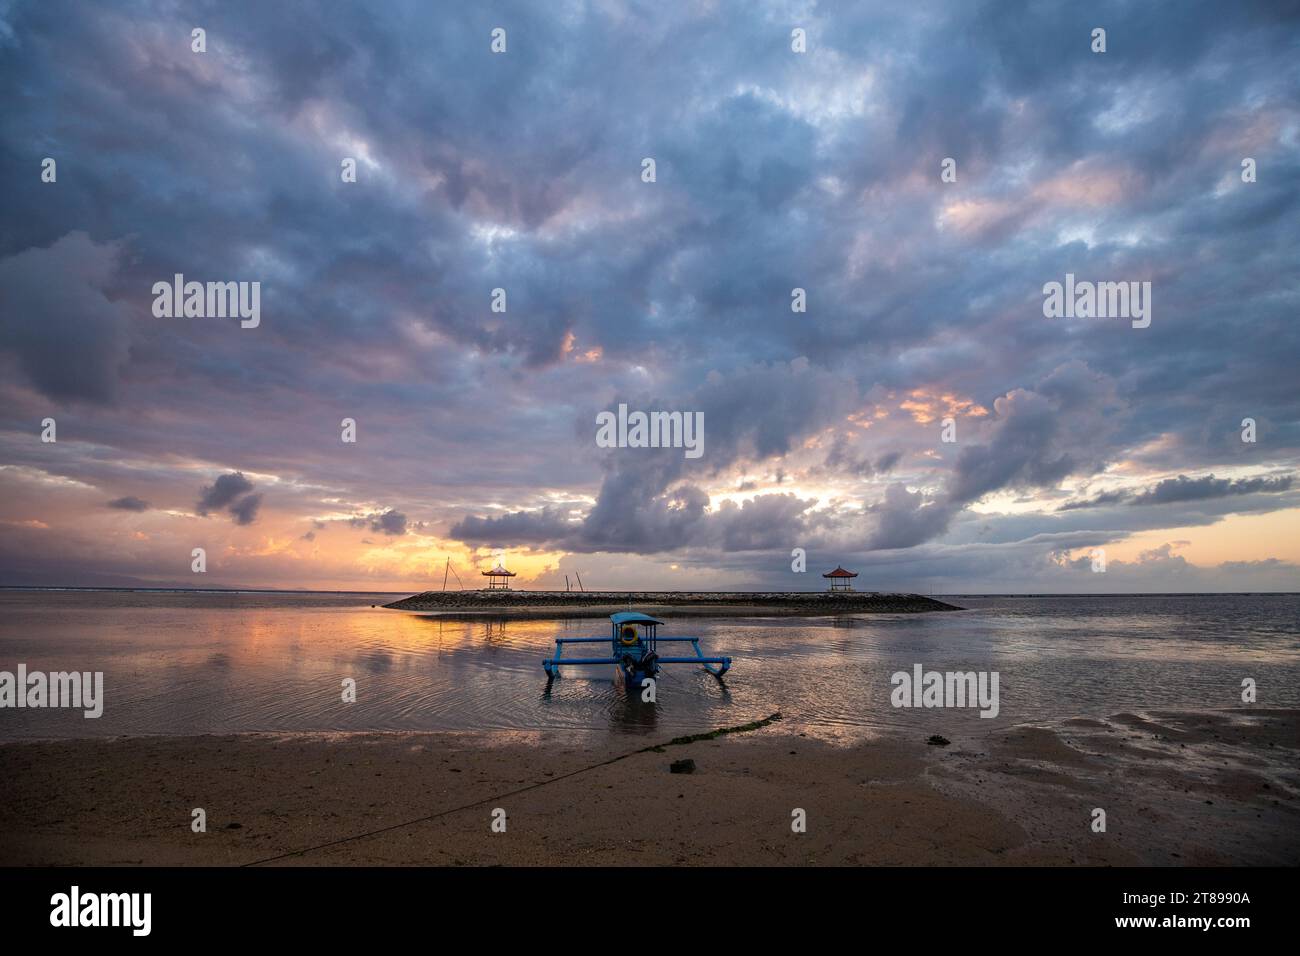 Sunrise at the sandy beach of Sanur. Temple in the water. Traditional fishing boat, Jukung on the beach. Hindu faith in Sanur on Bali. Dream island an Stock Photo